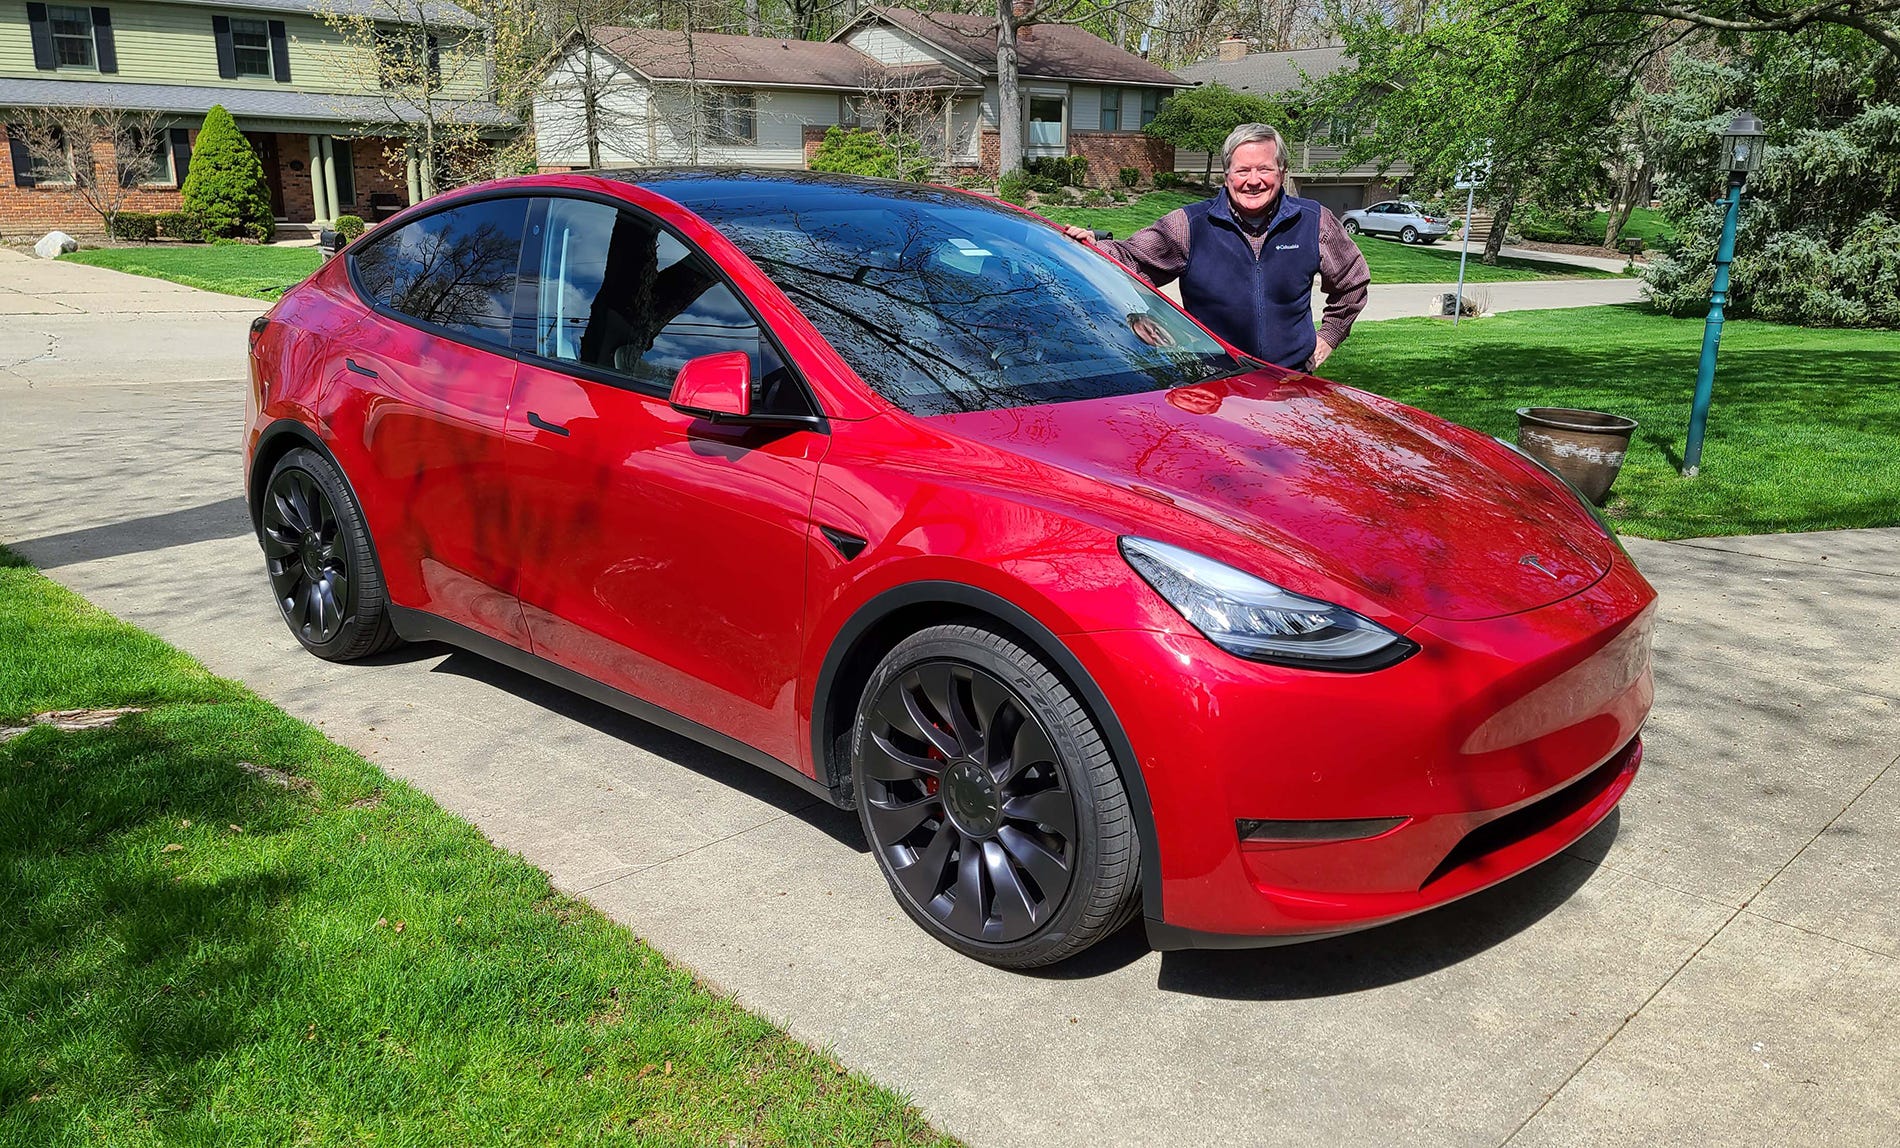 Ex-GM engineer Dick Amacher allowed The Detroit News to test drive his Tesla Model Y, one of the first in Michigan. Amacher also owns a Tesla Model 3 sedan.